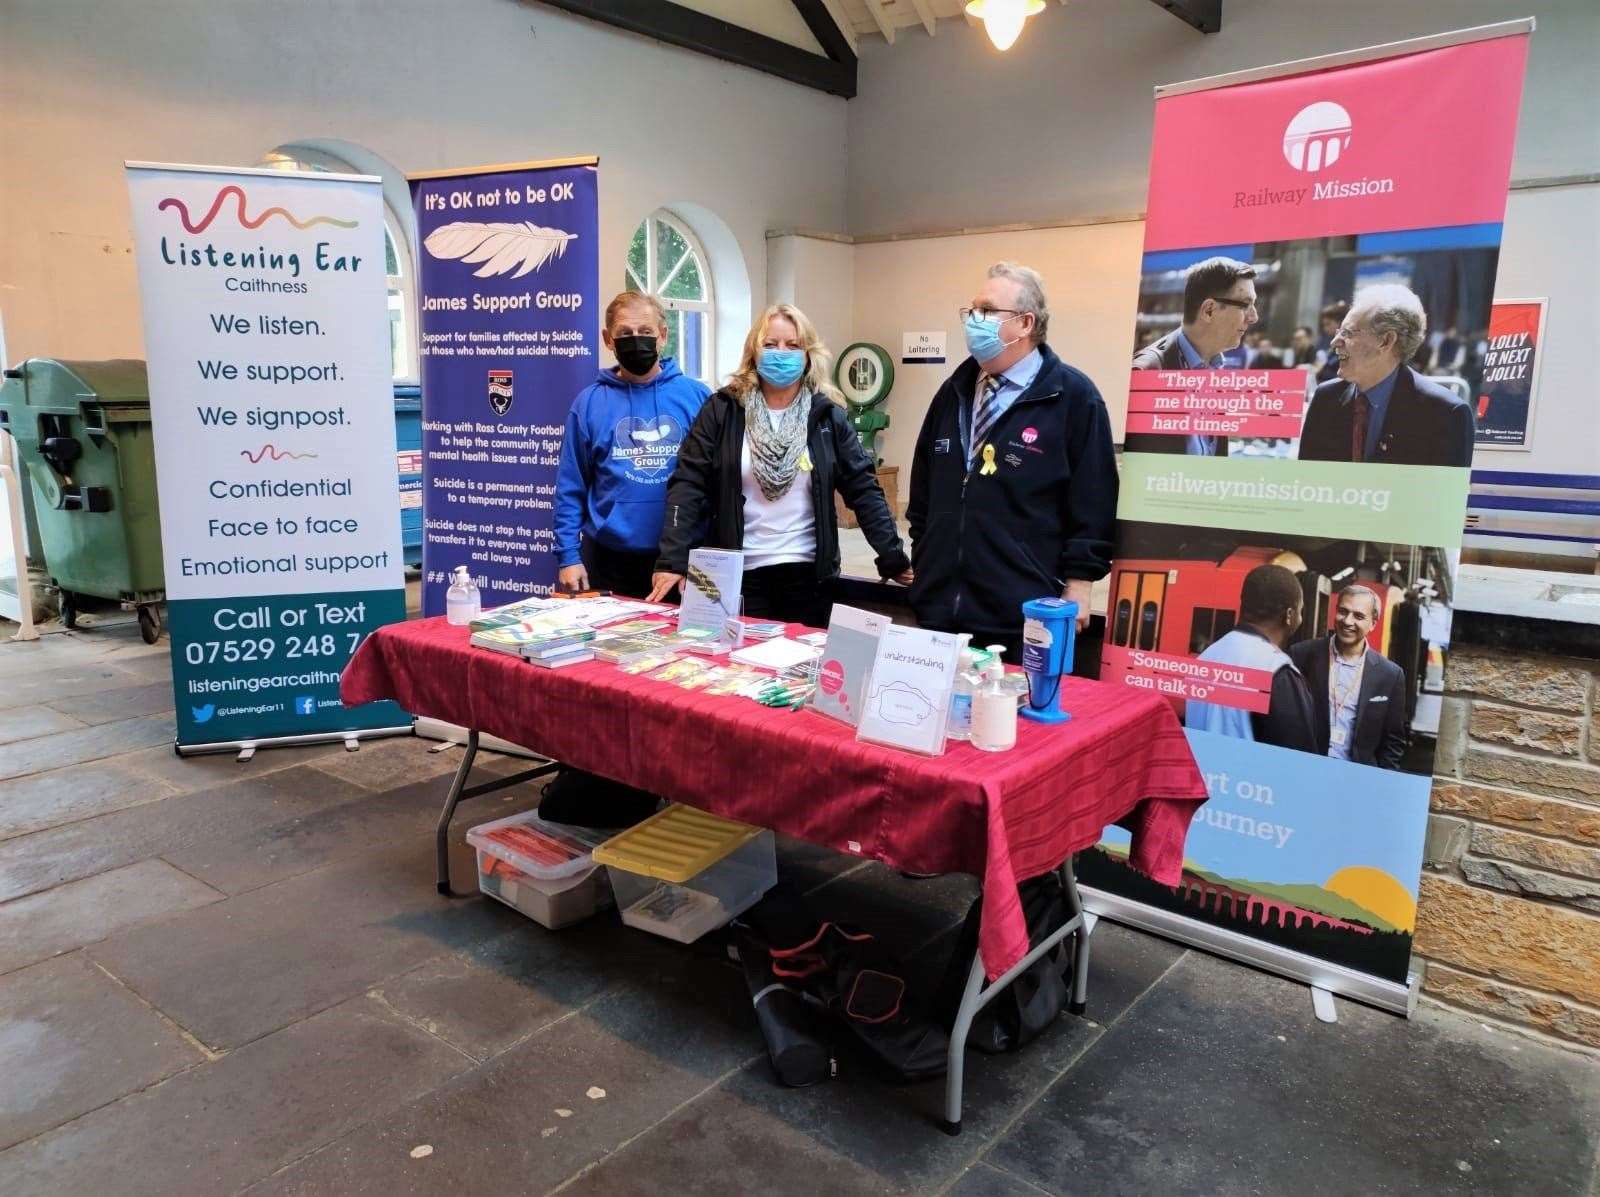 Volunteers at the pop-up stall in the Wick railway station.